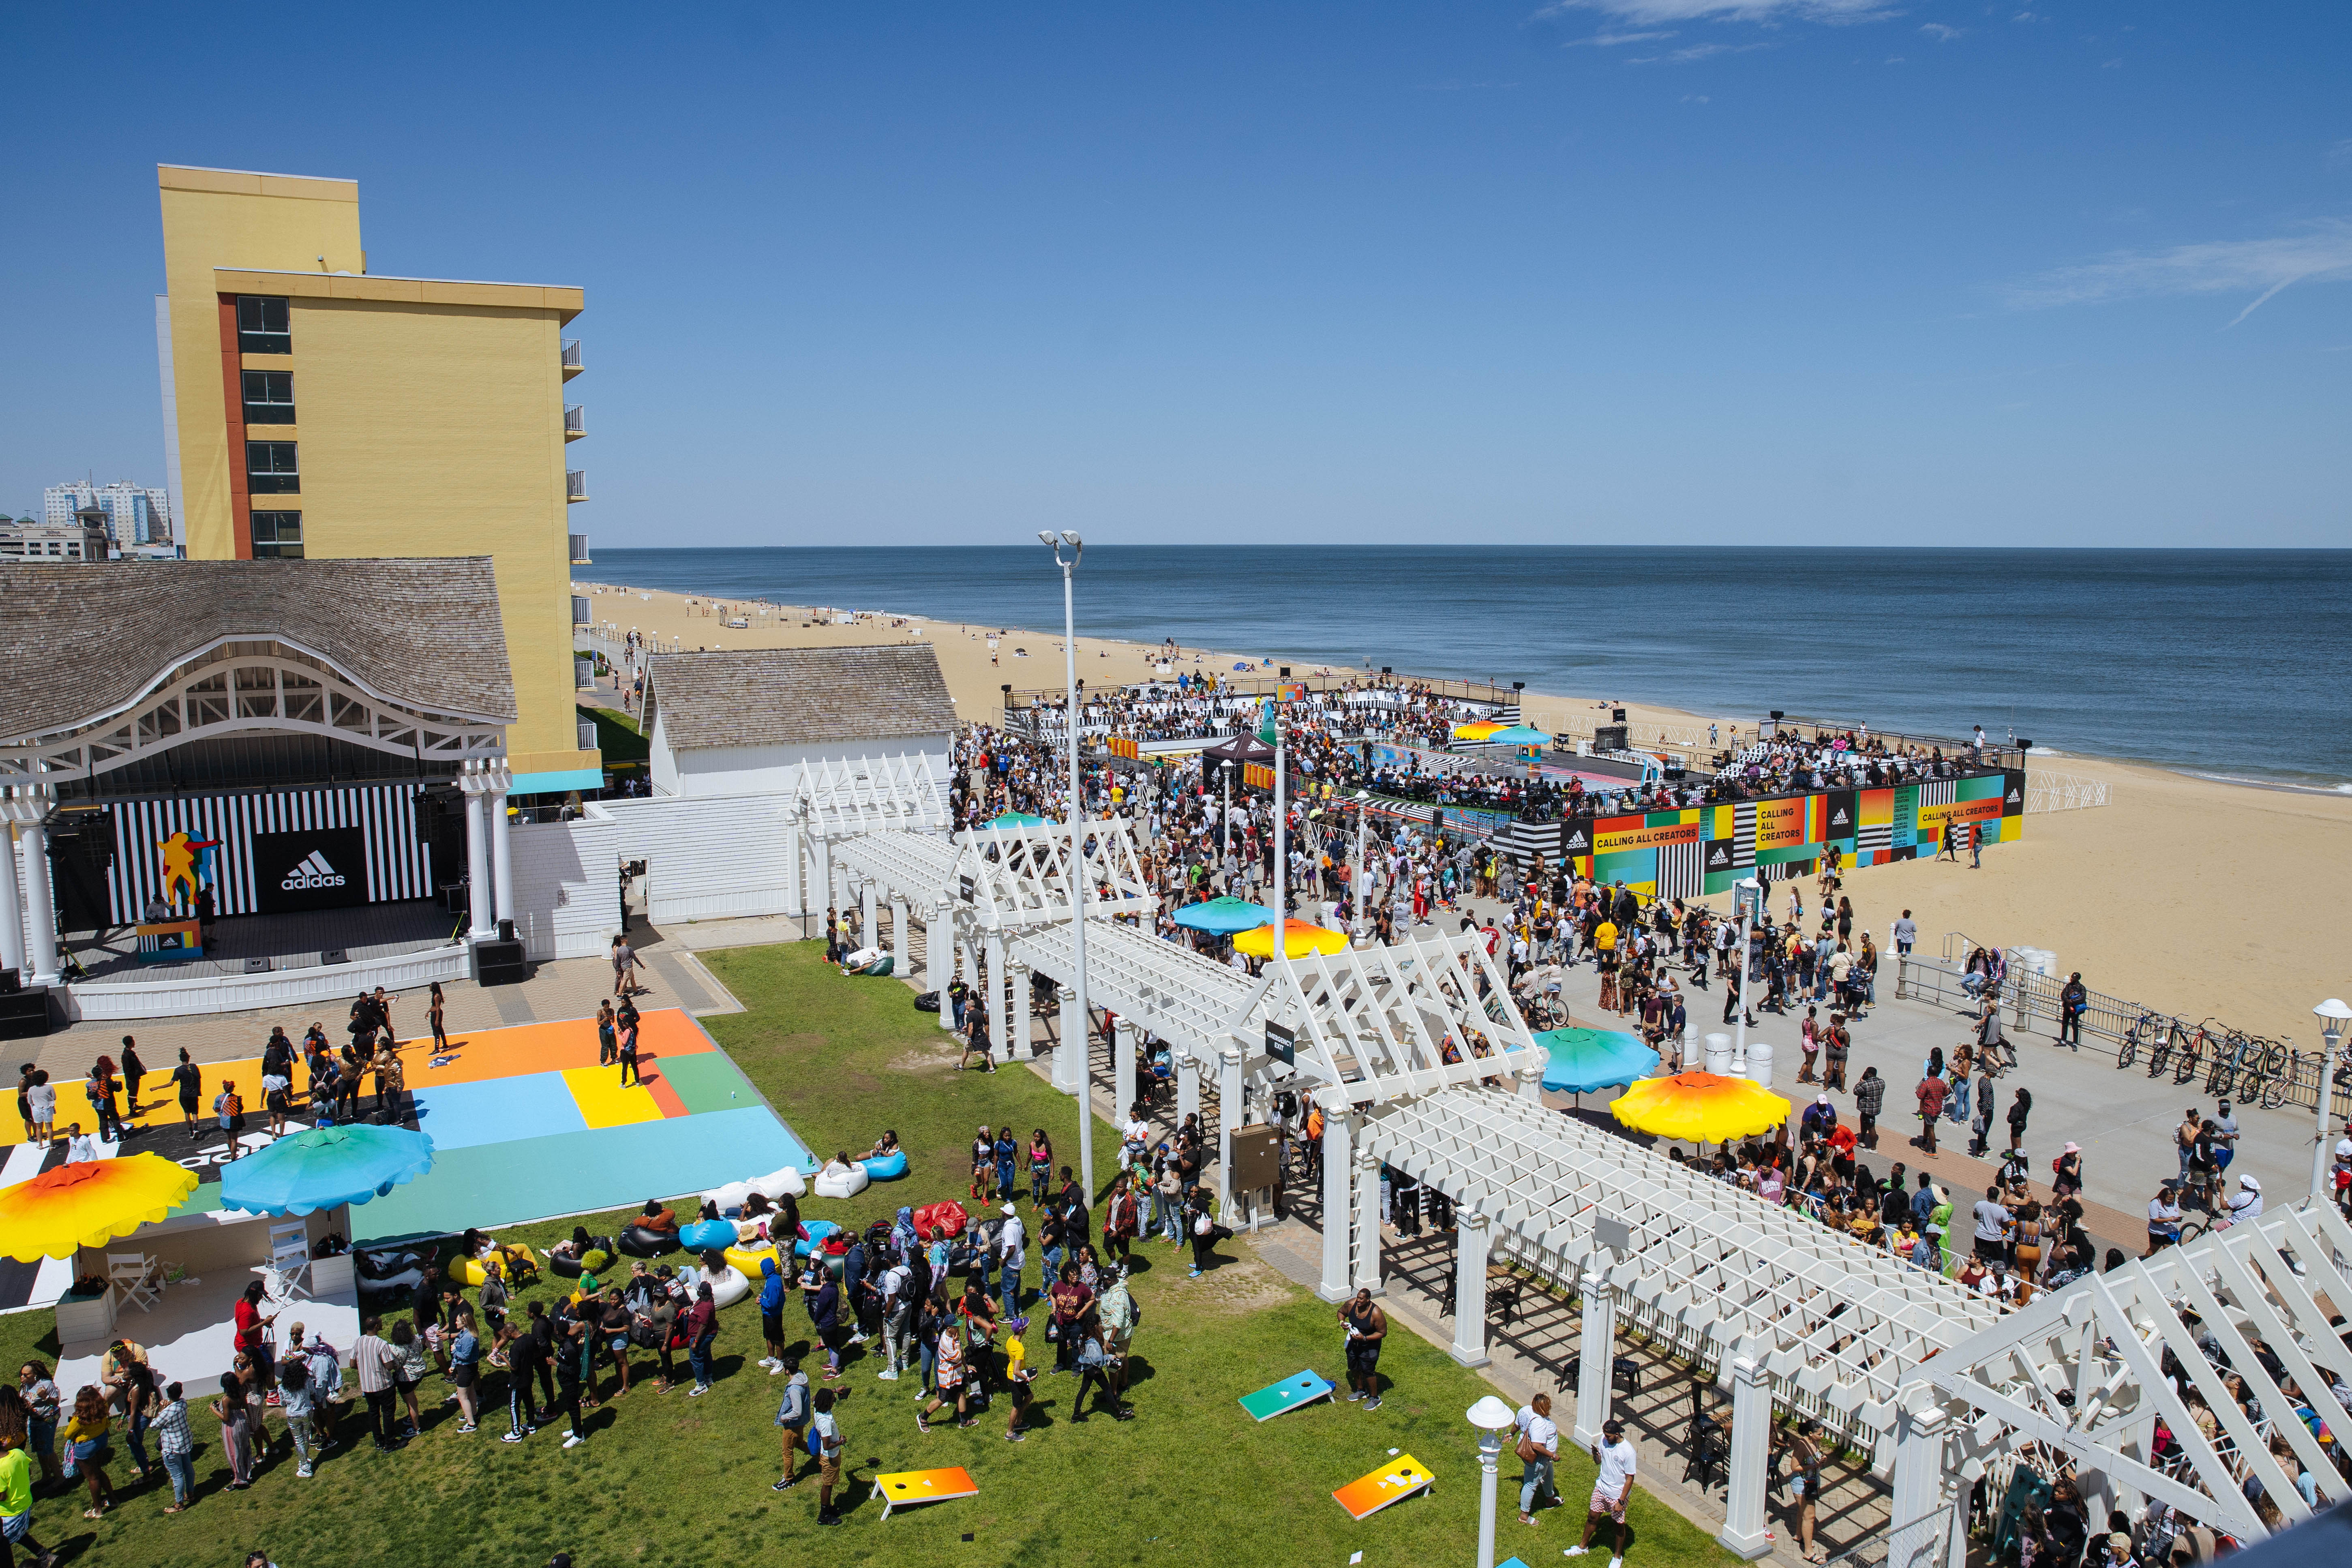 Something in the Water brings crowds back to beach - Virginia Business